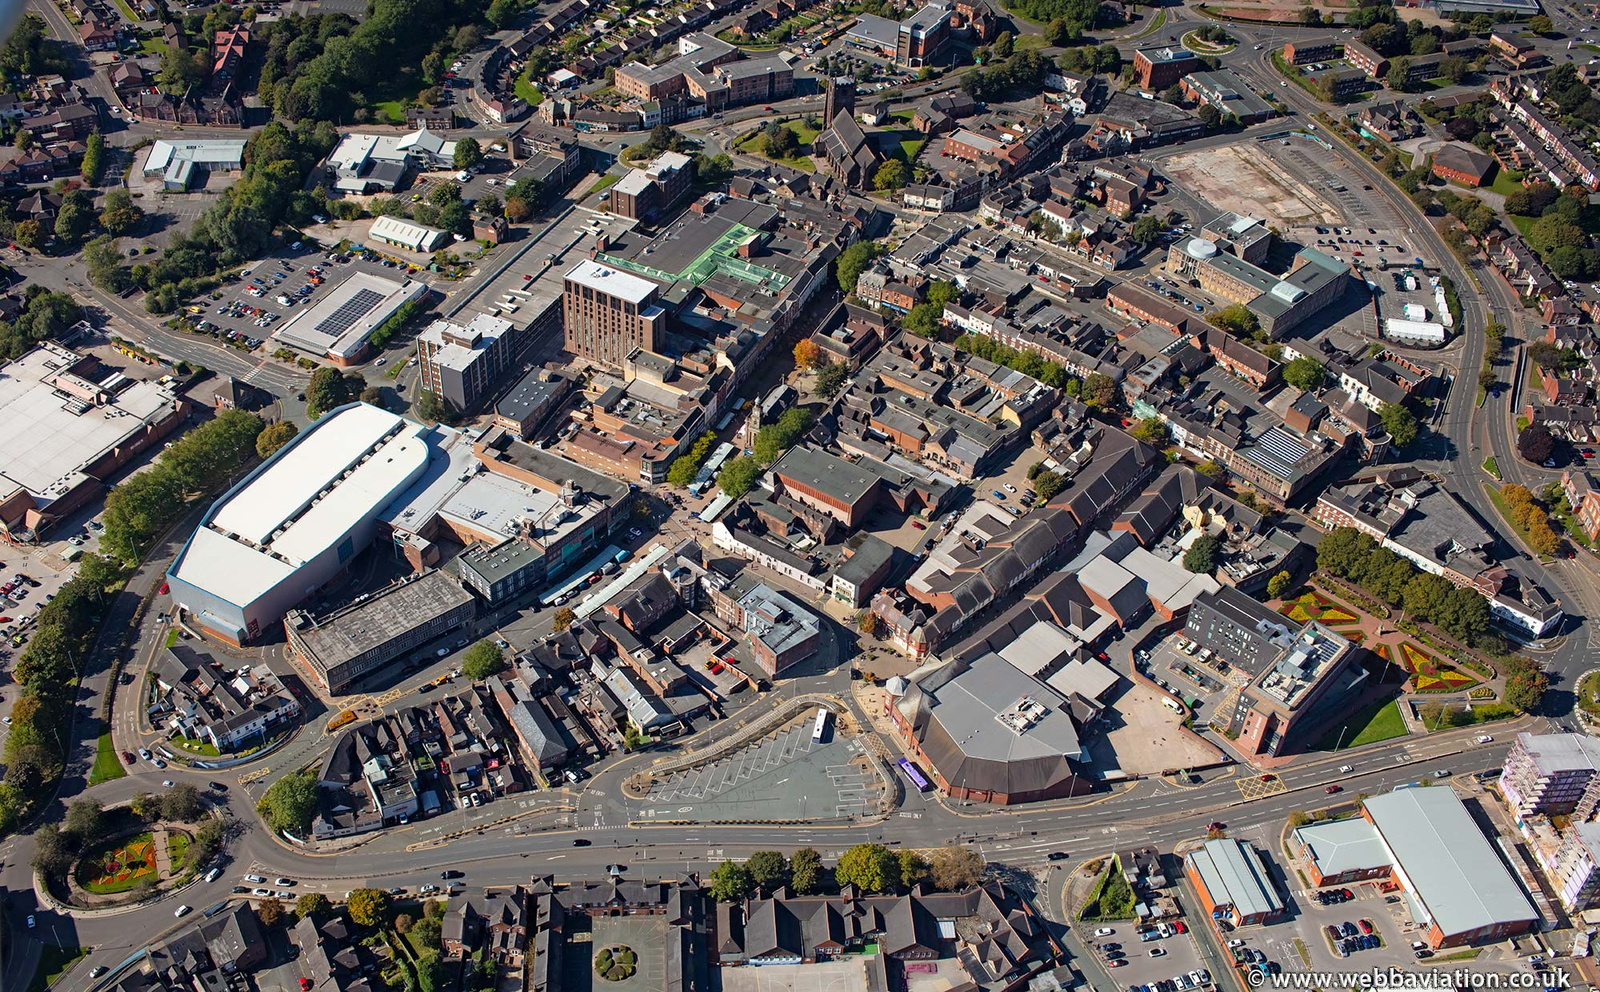 Newcastle-under-Lyme town centre Staffordshire  from the air 